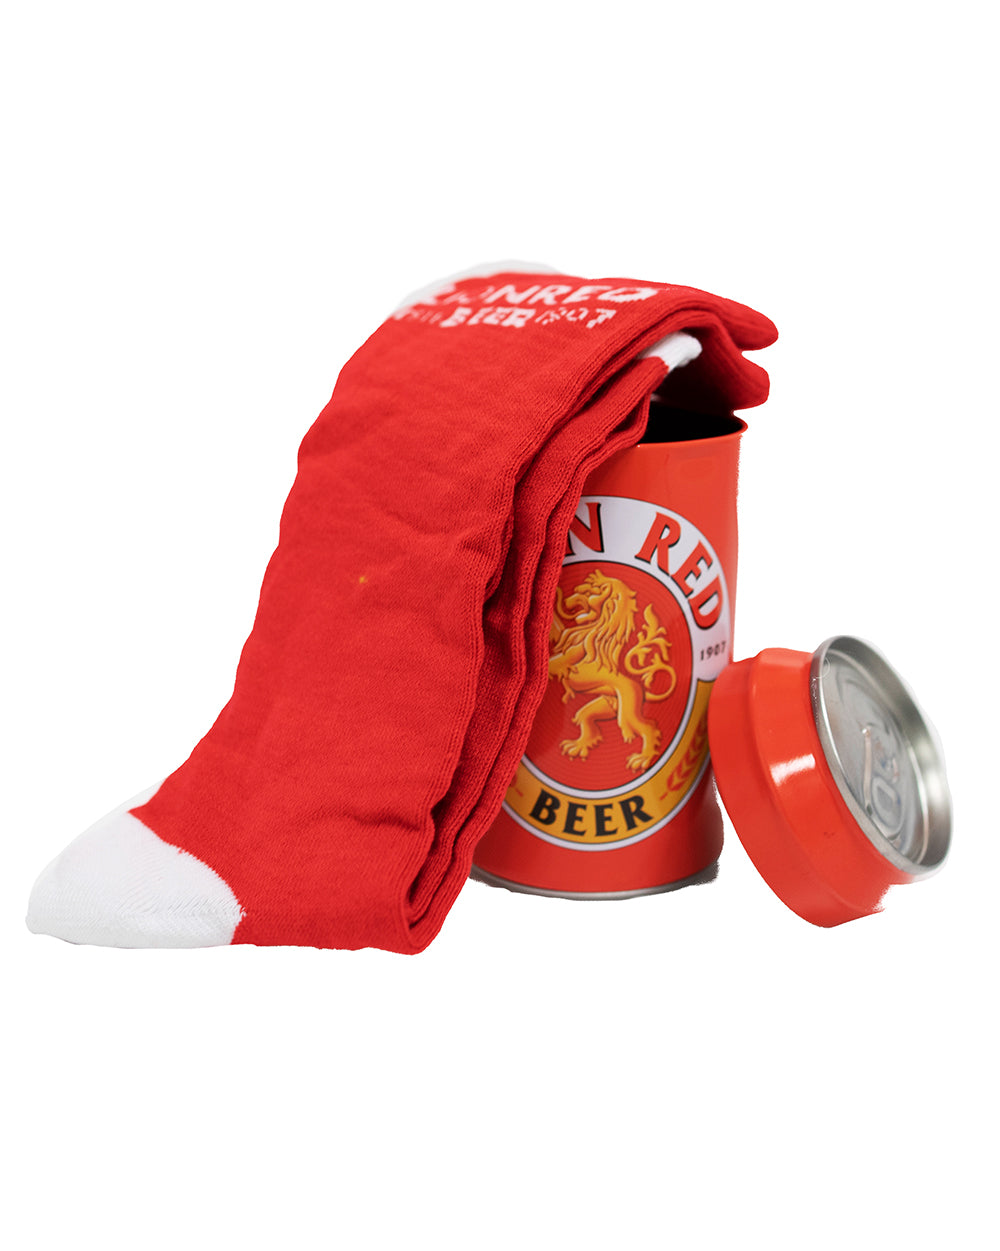 Lion Red Socks In A Can -  Beer Gear Apparel & Merchandise - Speights - Lion Red - VB - Tokyo Dy merch